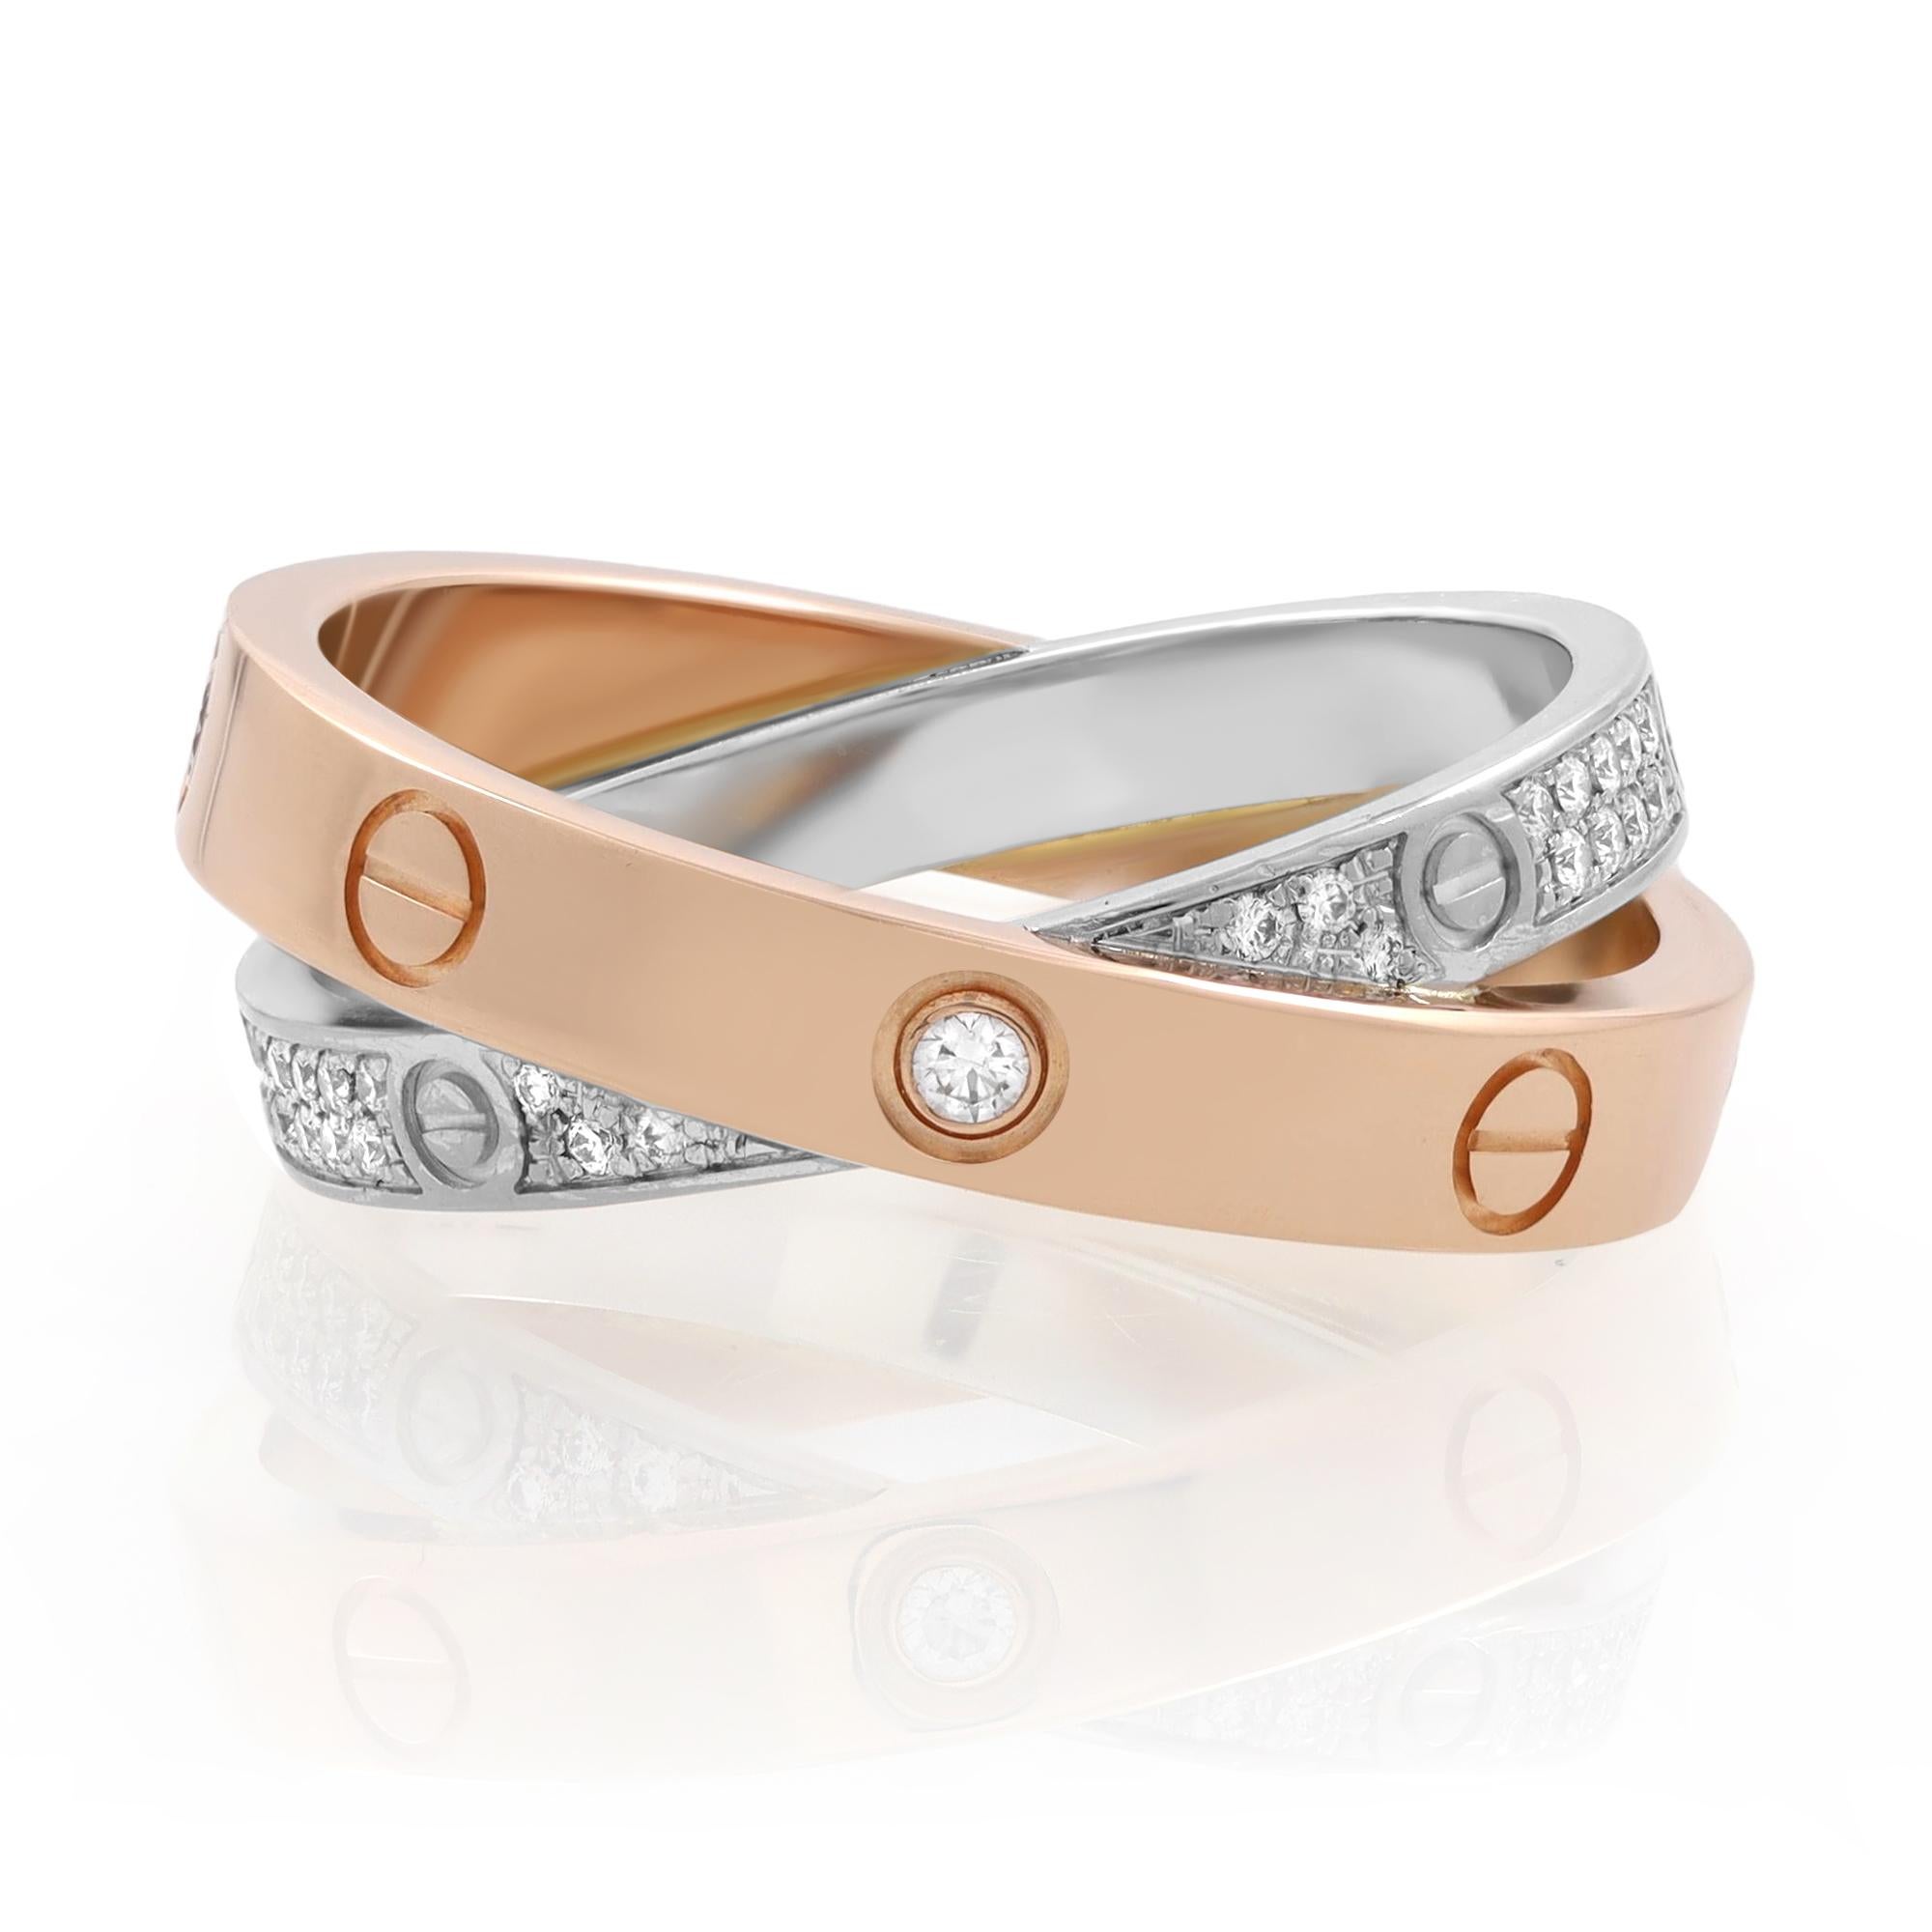 Cartier Love two tone gold pave diamond ring. Crafted in 18K rose gold and 18K white gold. This ring is set with 52 brilliant cut diamonds totaling 0.19 carats. White gold width 2.6mm. Rose gold width 3.5mm. Ring size 52 US 7. Excellent pre-owned